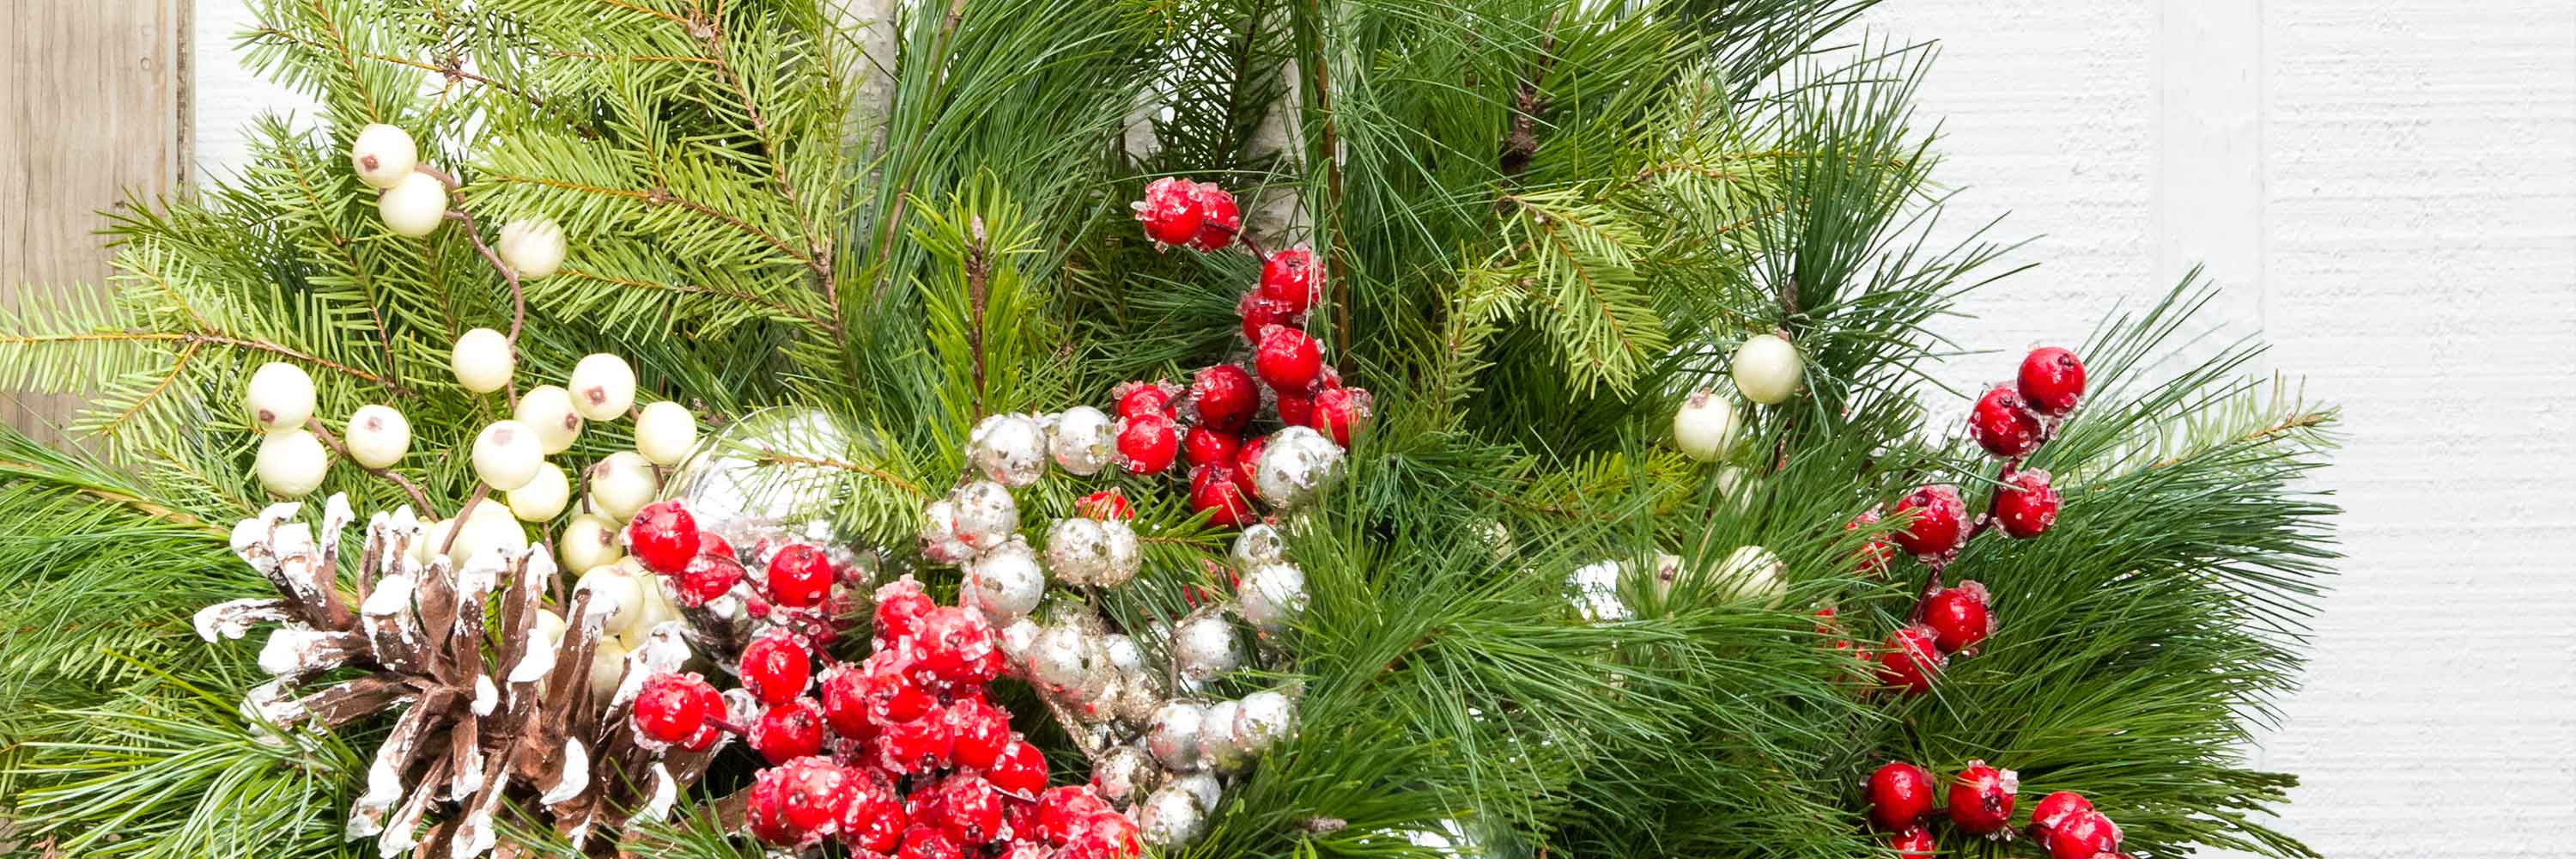 Preserve Fresh Evergreen Branches For Christmas - The Peaceful